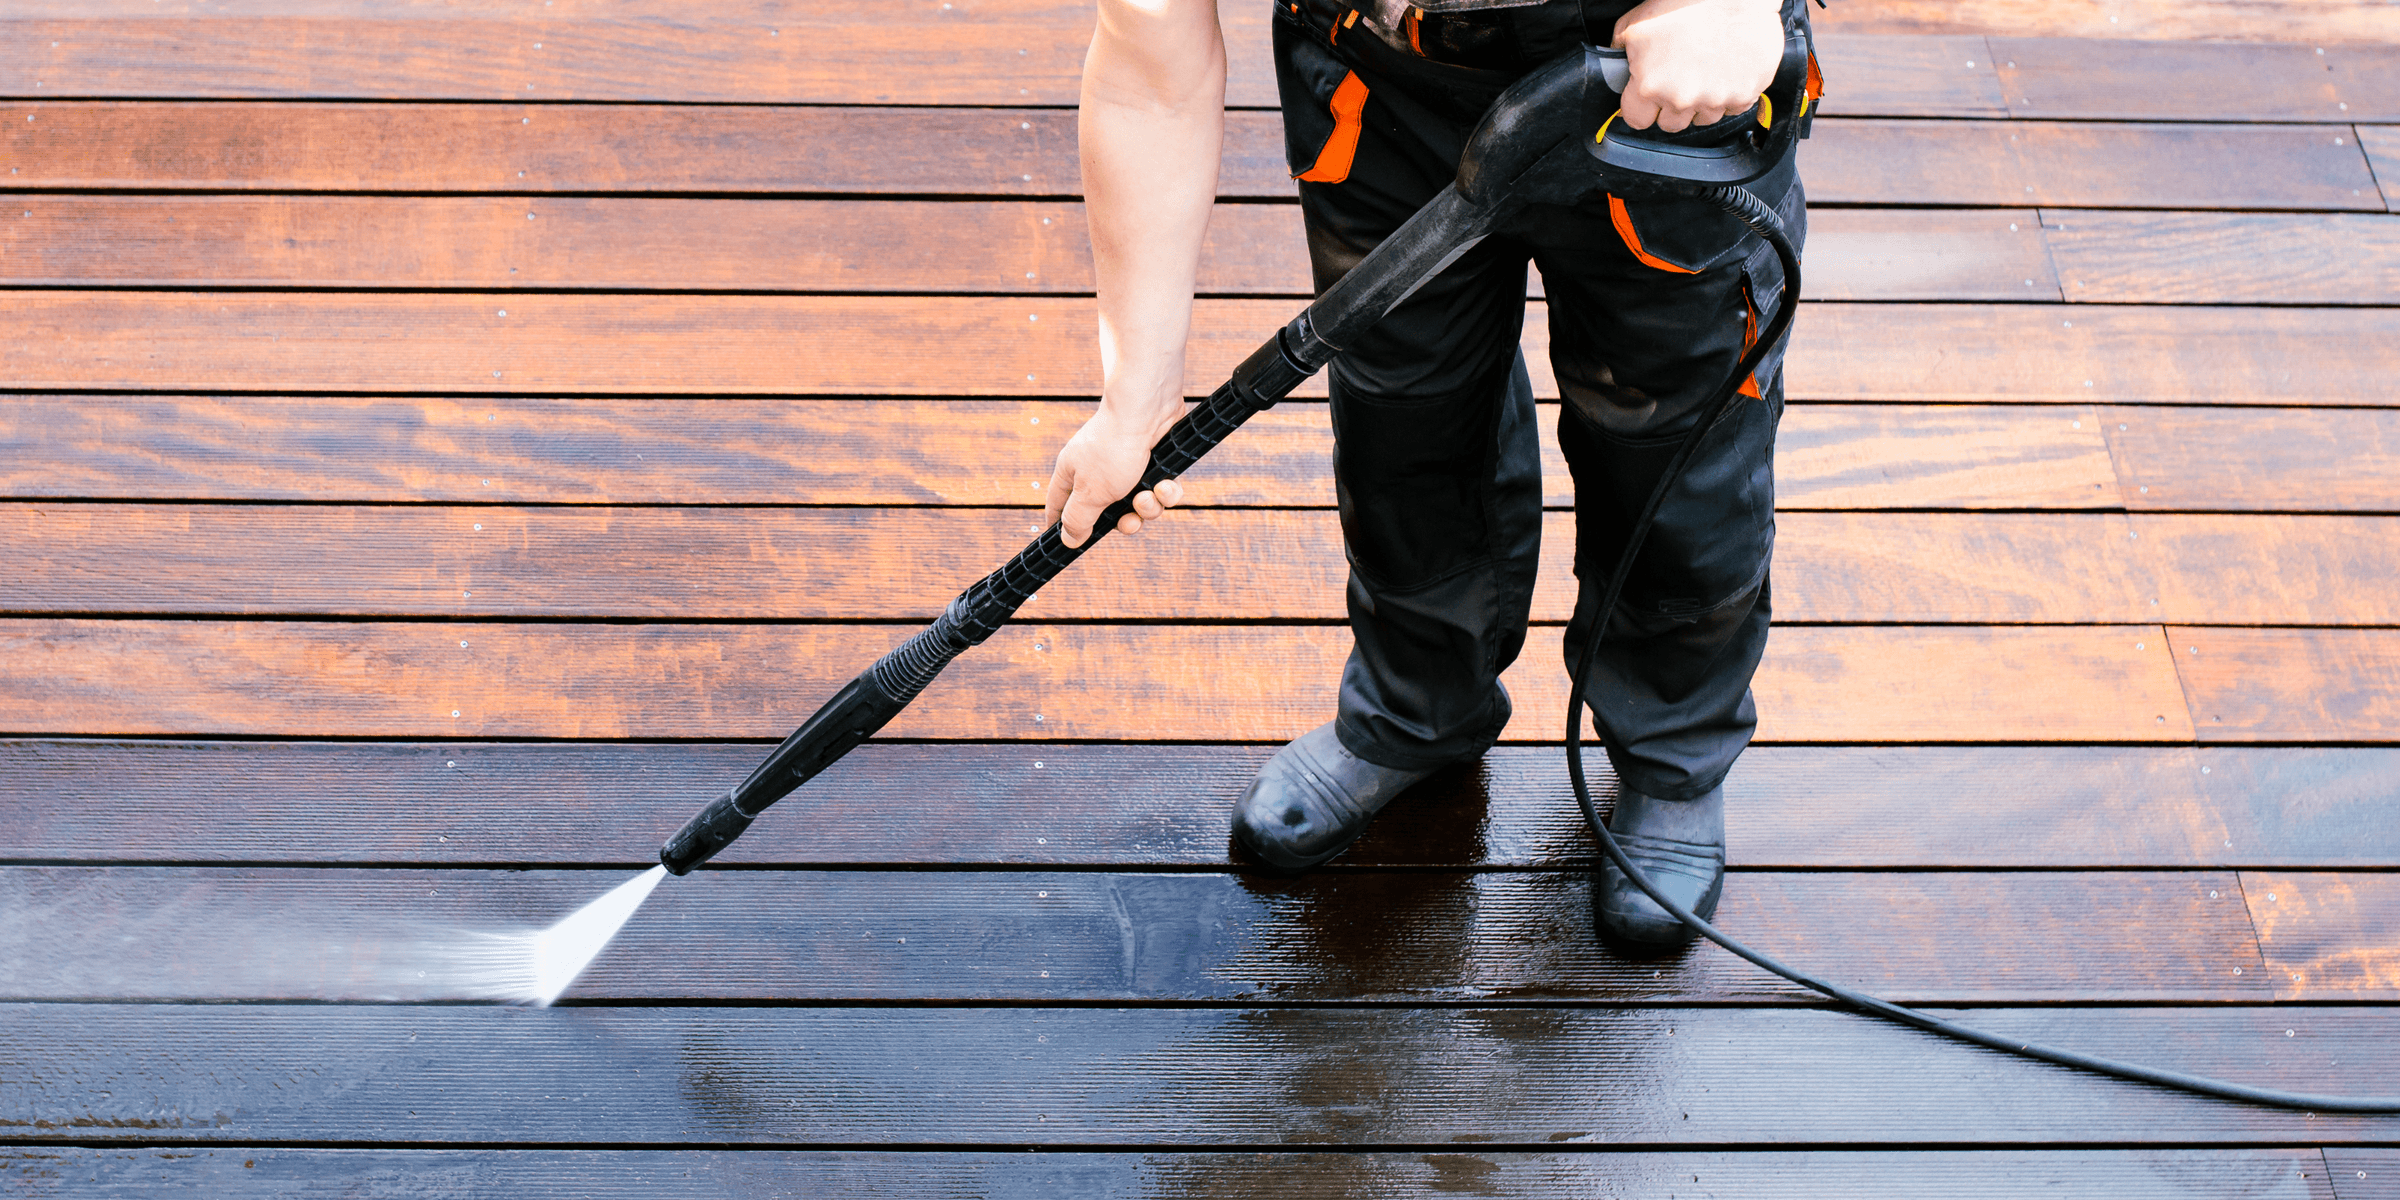 Pressure Washer Cleaning Timber Deck 